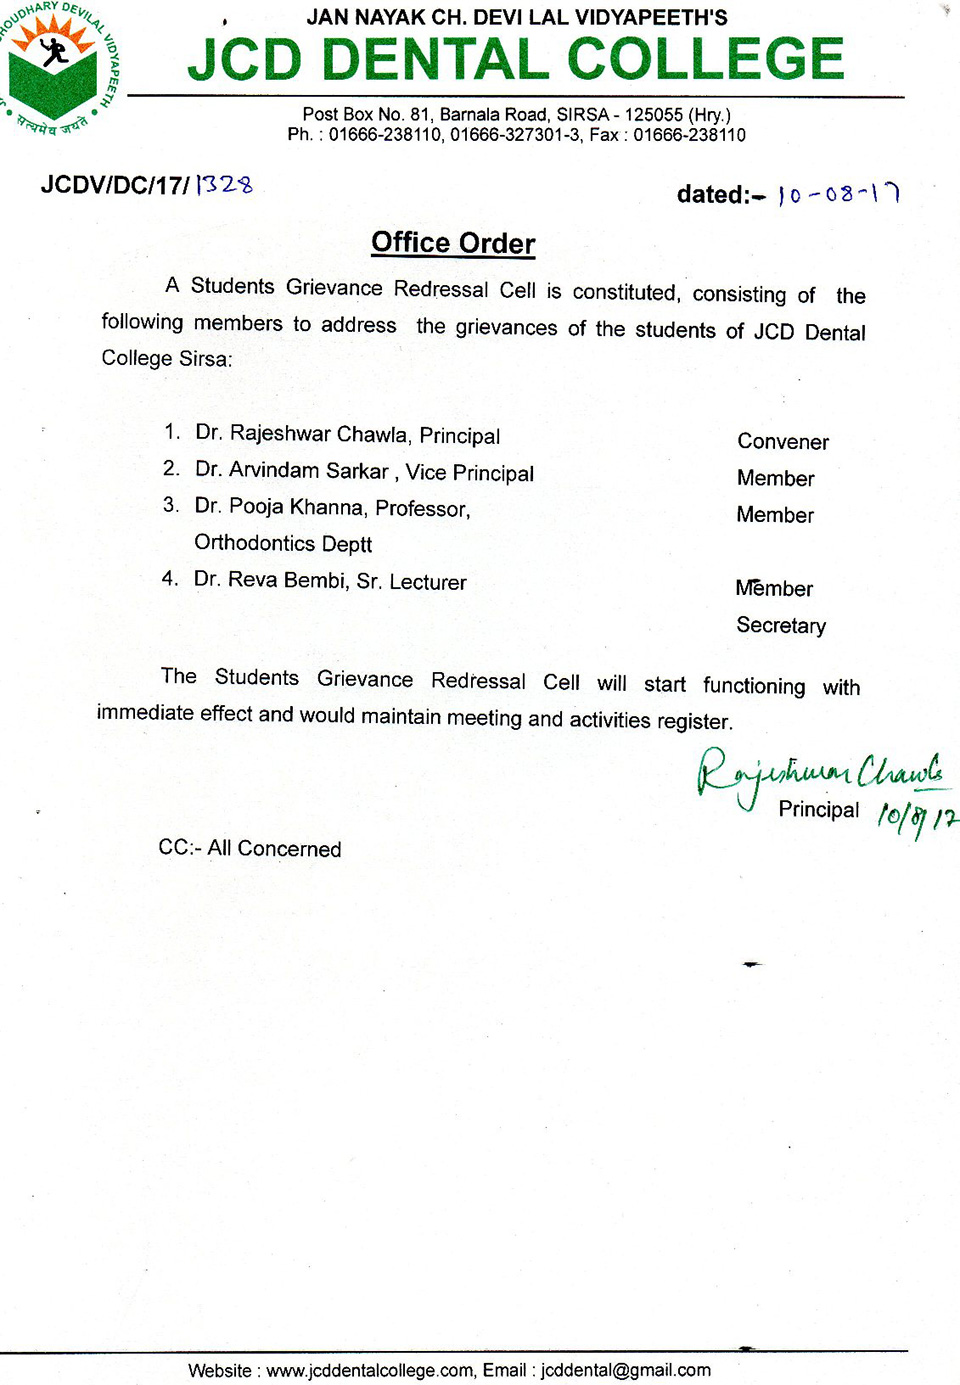 students-grievance-redressal-cell